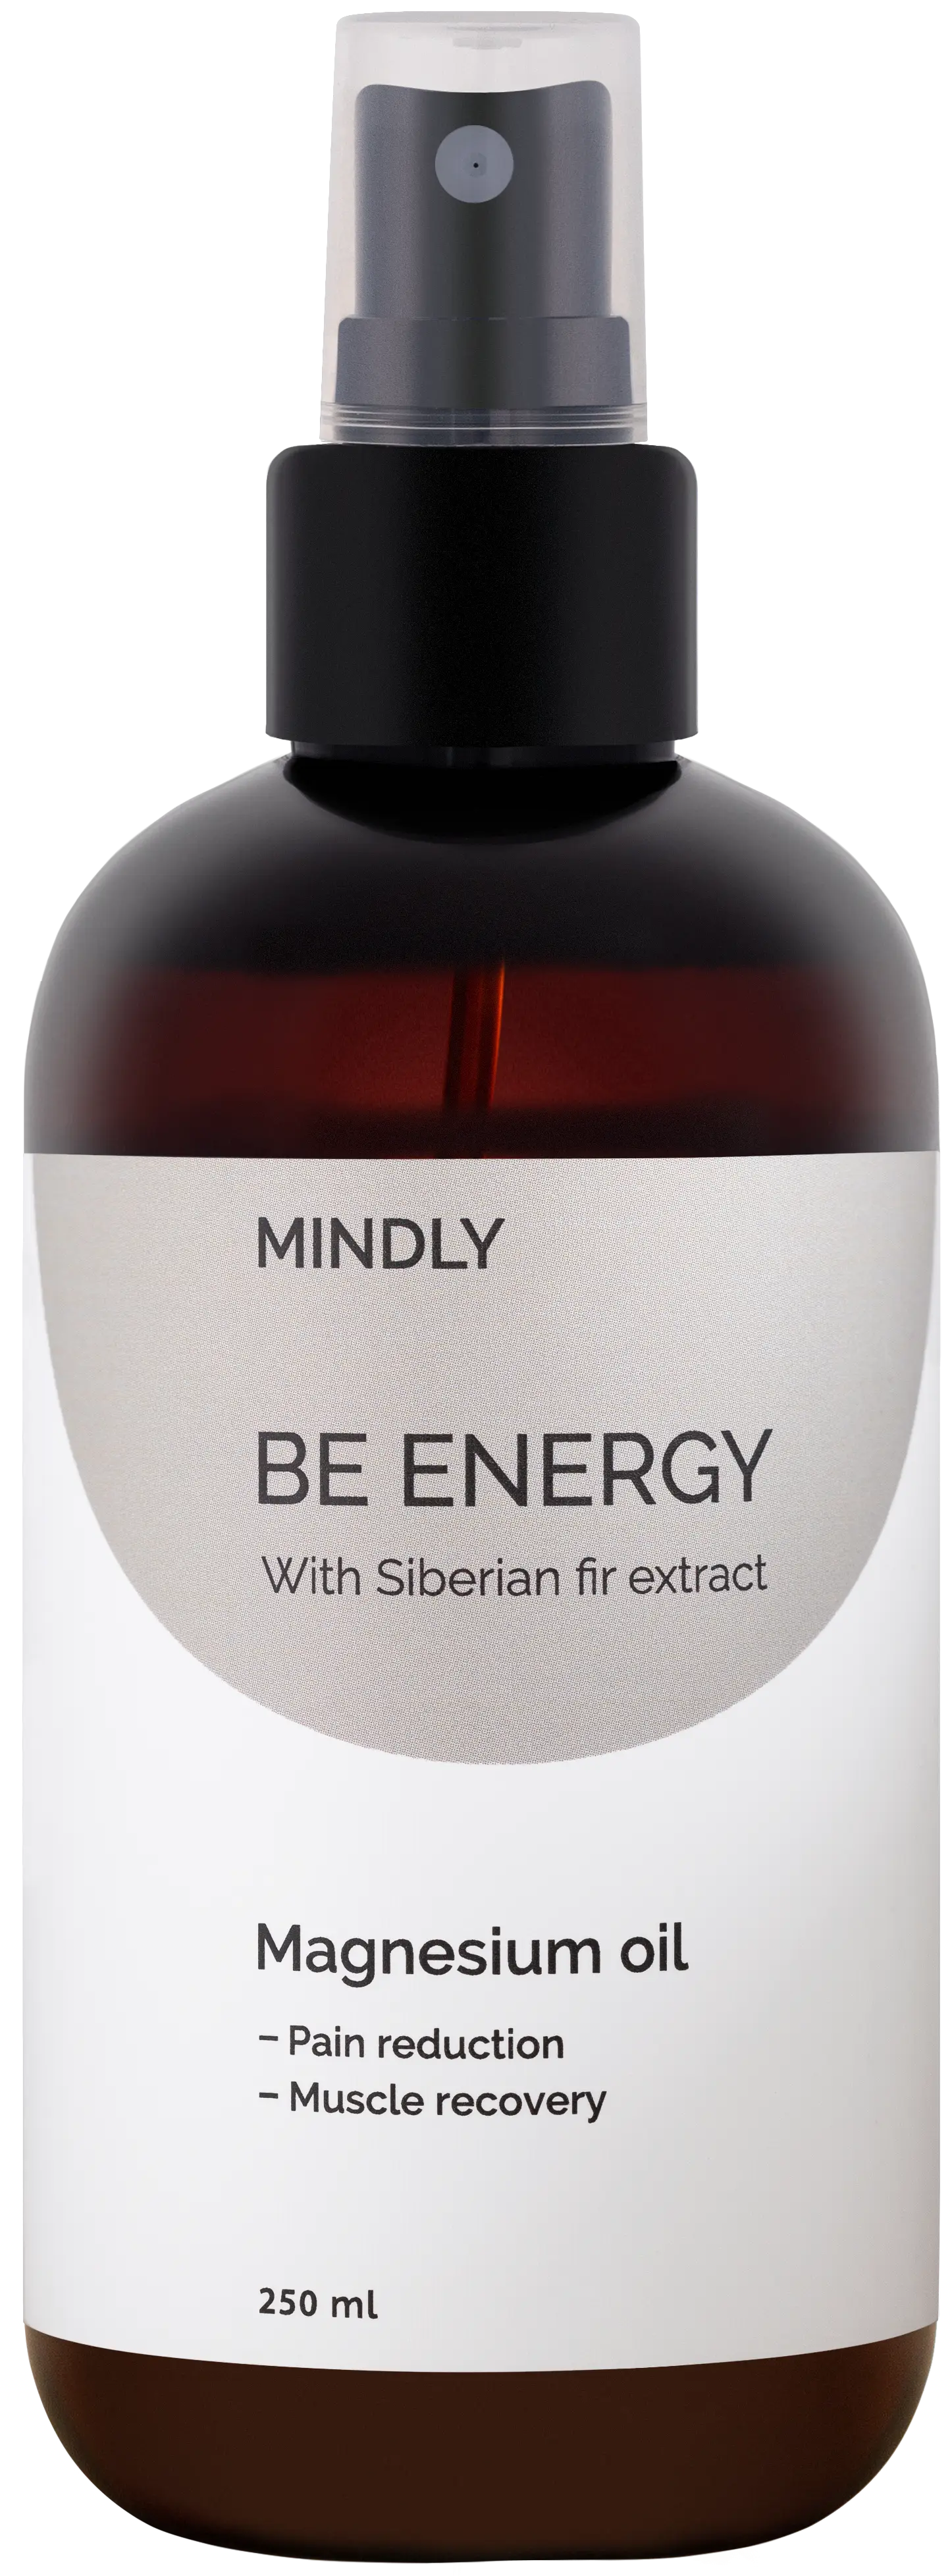 MINDLY Be energy